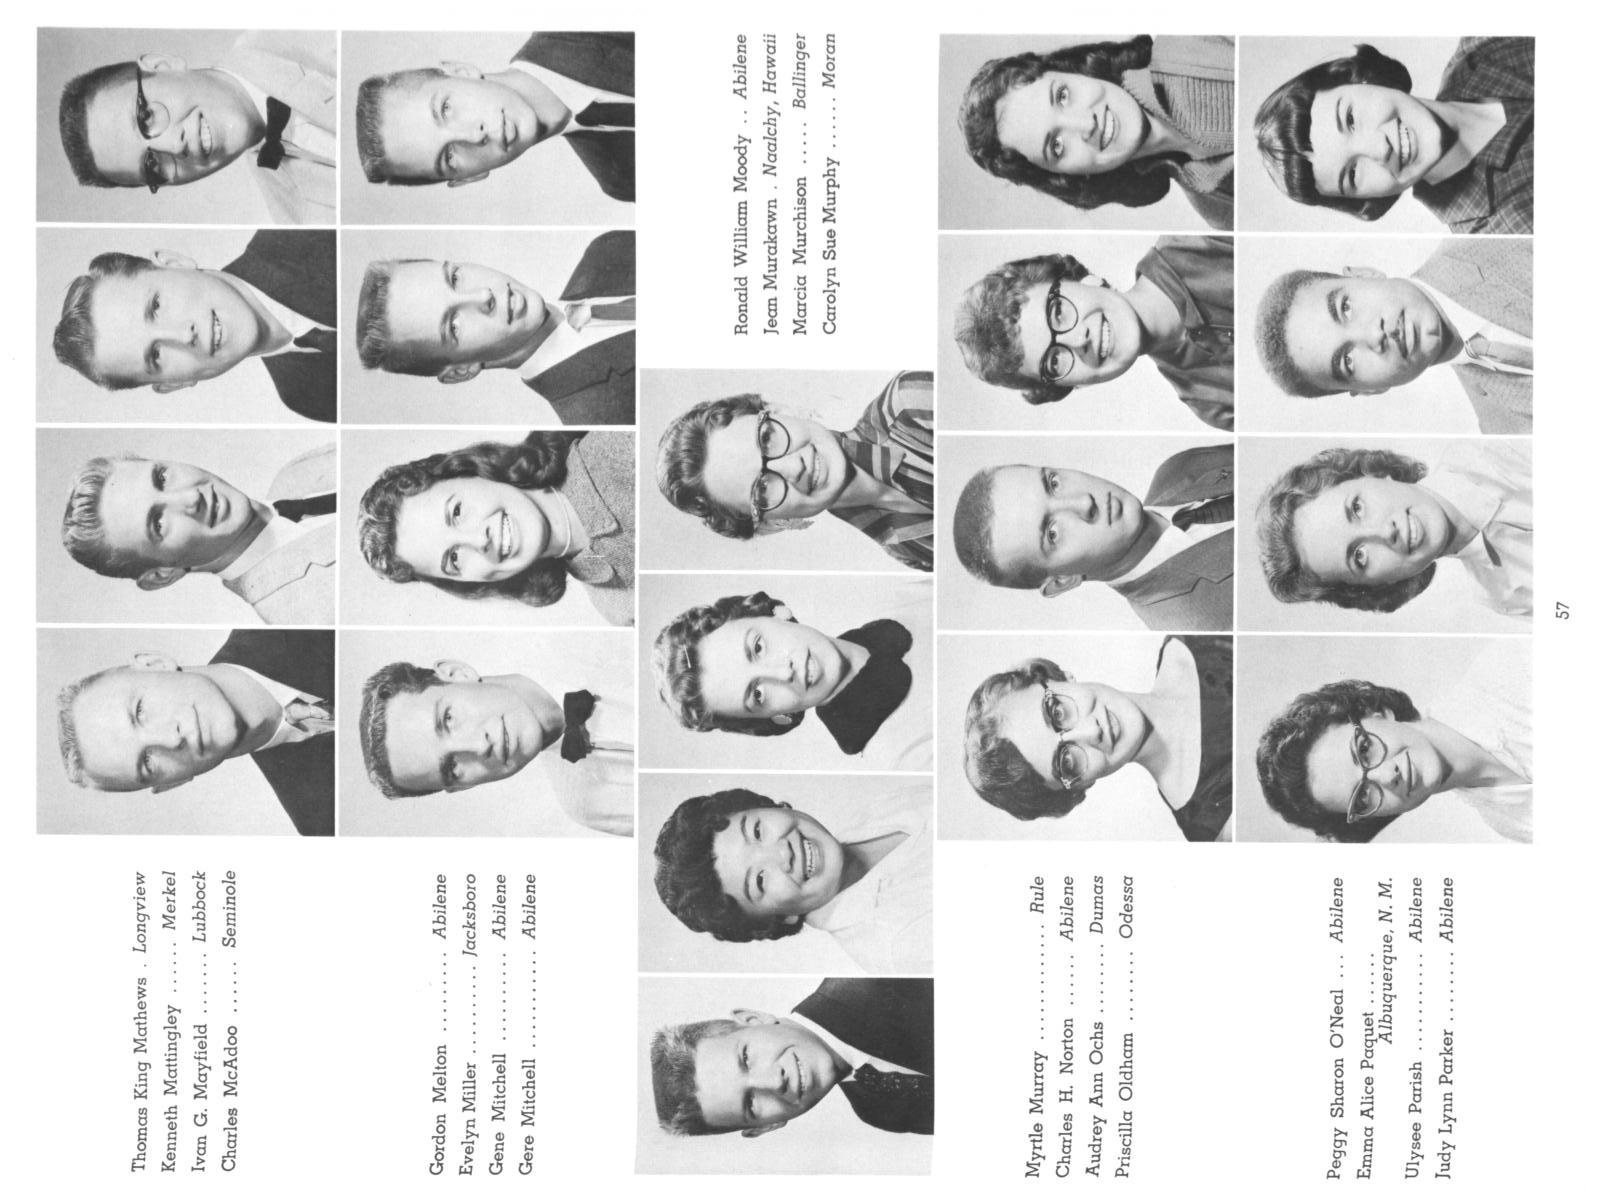 The Totem, Yearbook of McMurry College, 1959
                                                
                                                    57
                                                